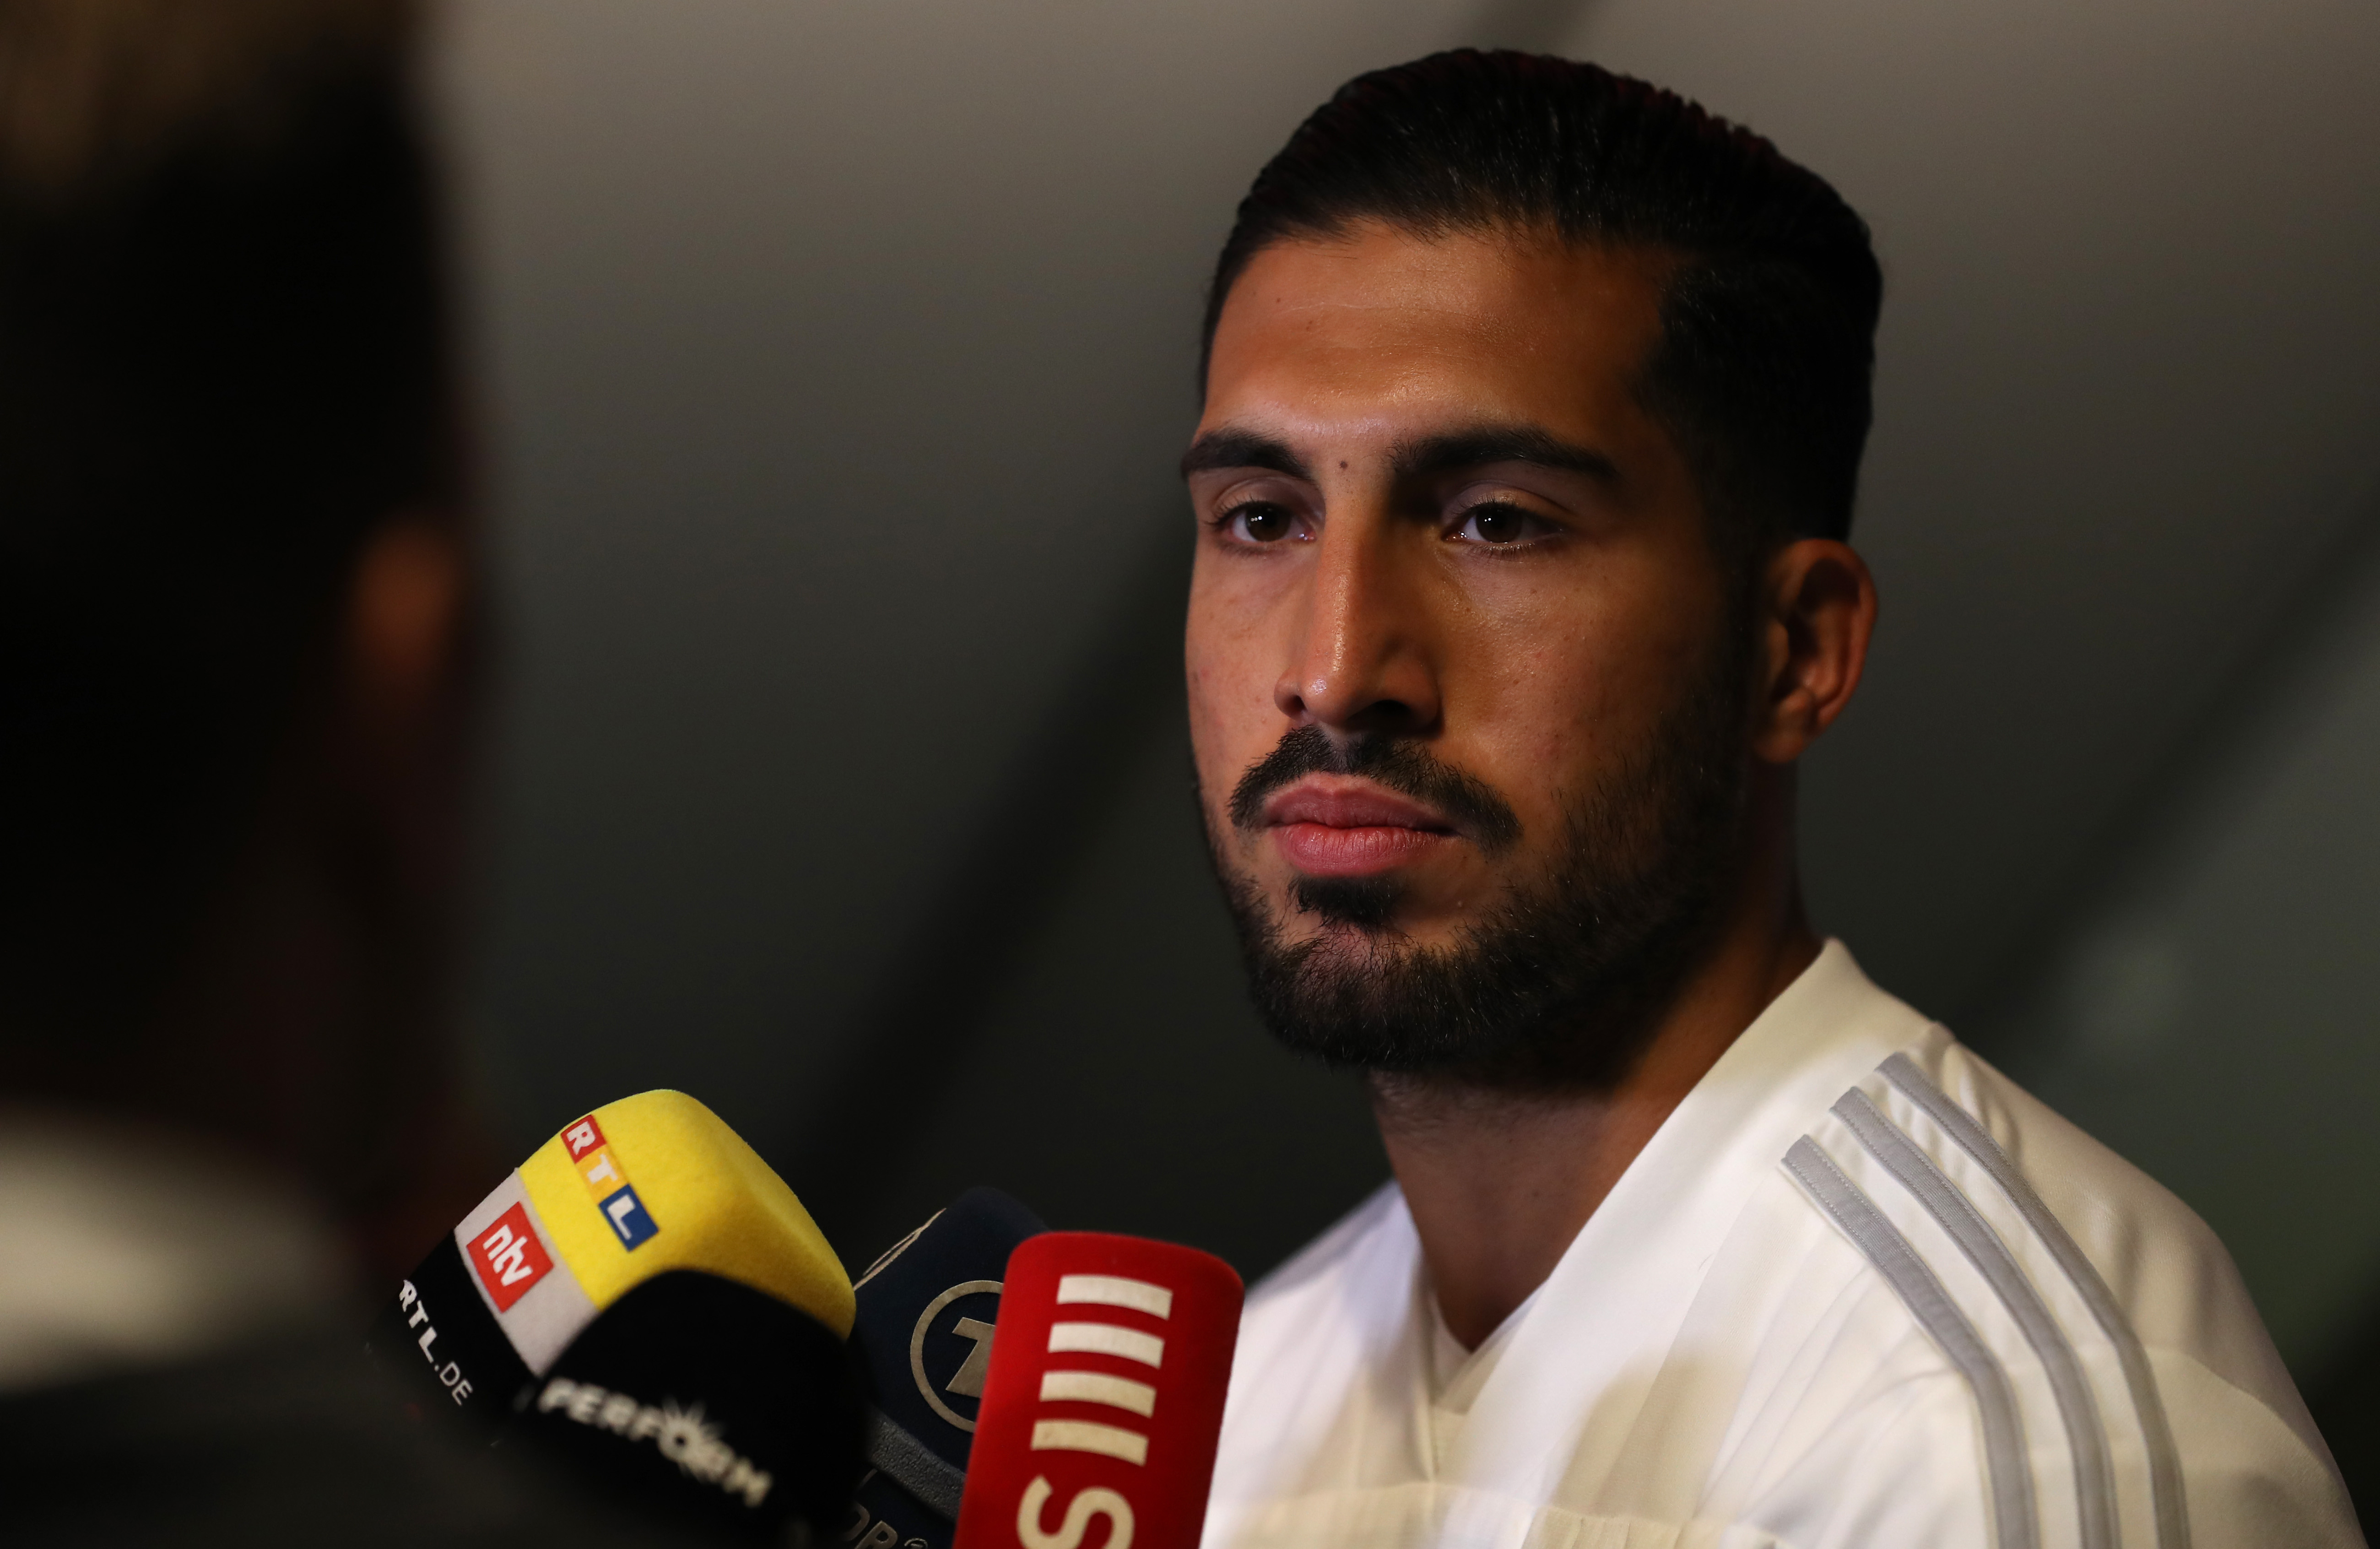 HAMBURG, GERMANY - SEPTEMBER 04: Emre Can of Germany speaks to the media ahead of a training session at Millerntor Stadium on September 04, 2019 in Hamburg, Germany. (Photo by Maja Hitij/Bongarts/Getty Images)